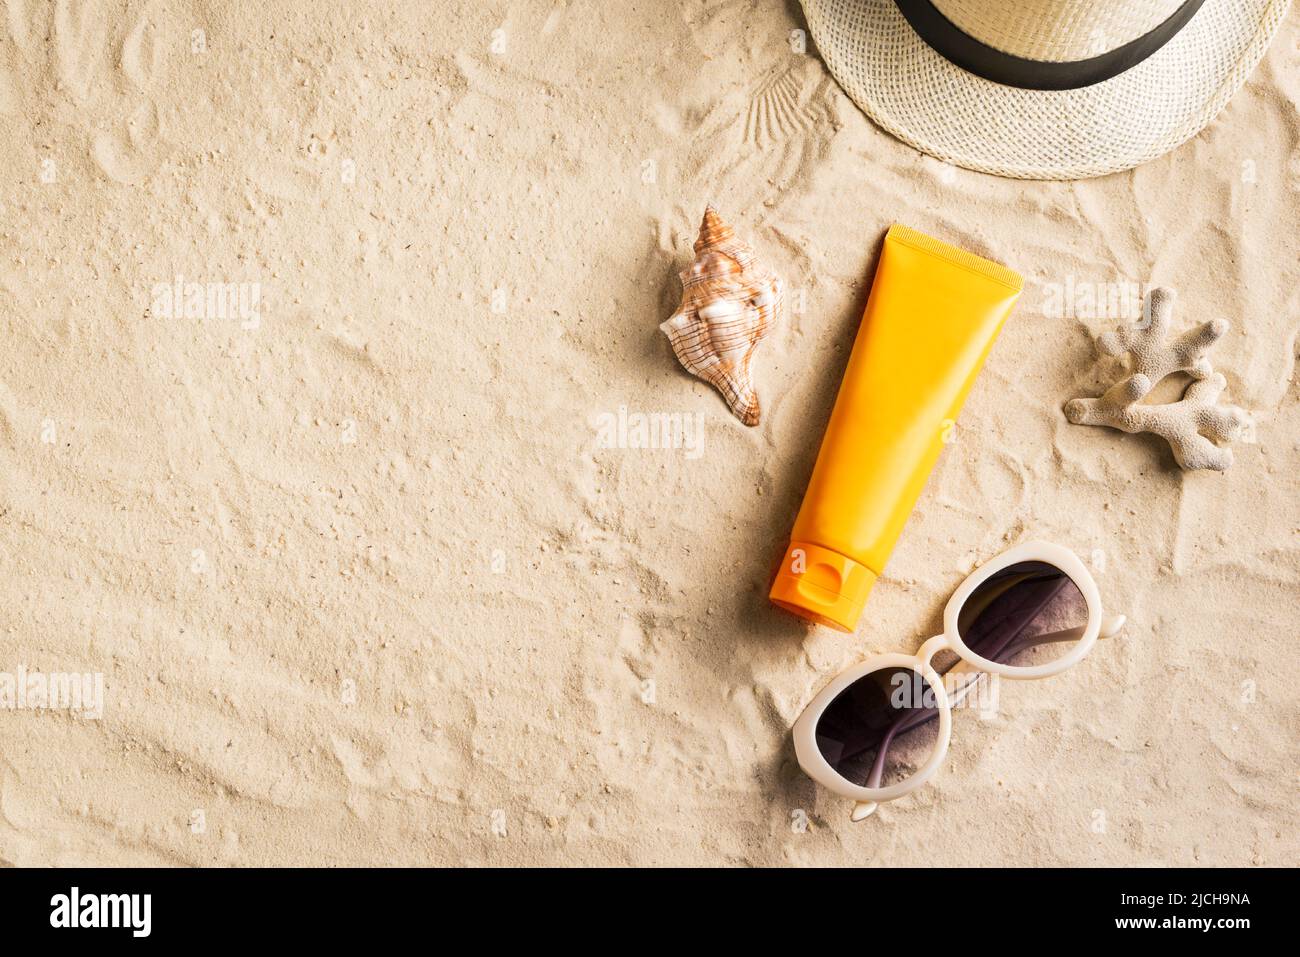 Sunscreen lotion on sandy beach as background, top view, copy space. Summer vacation and skin care concept, spf uv-protect cosmetic products. Stock Photo